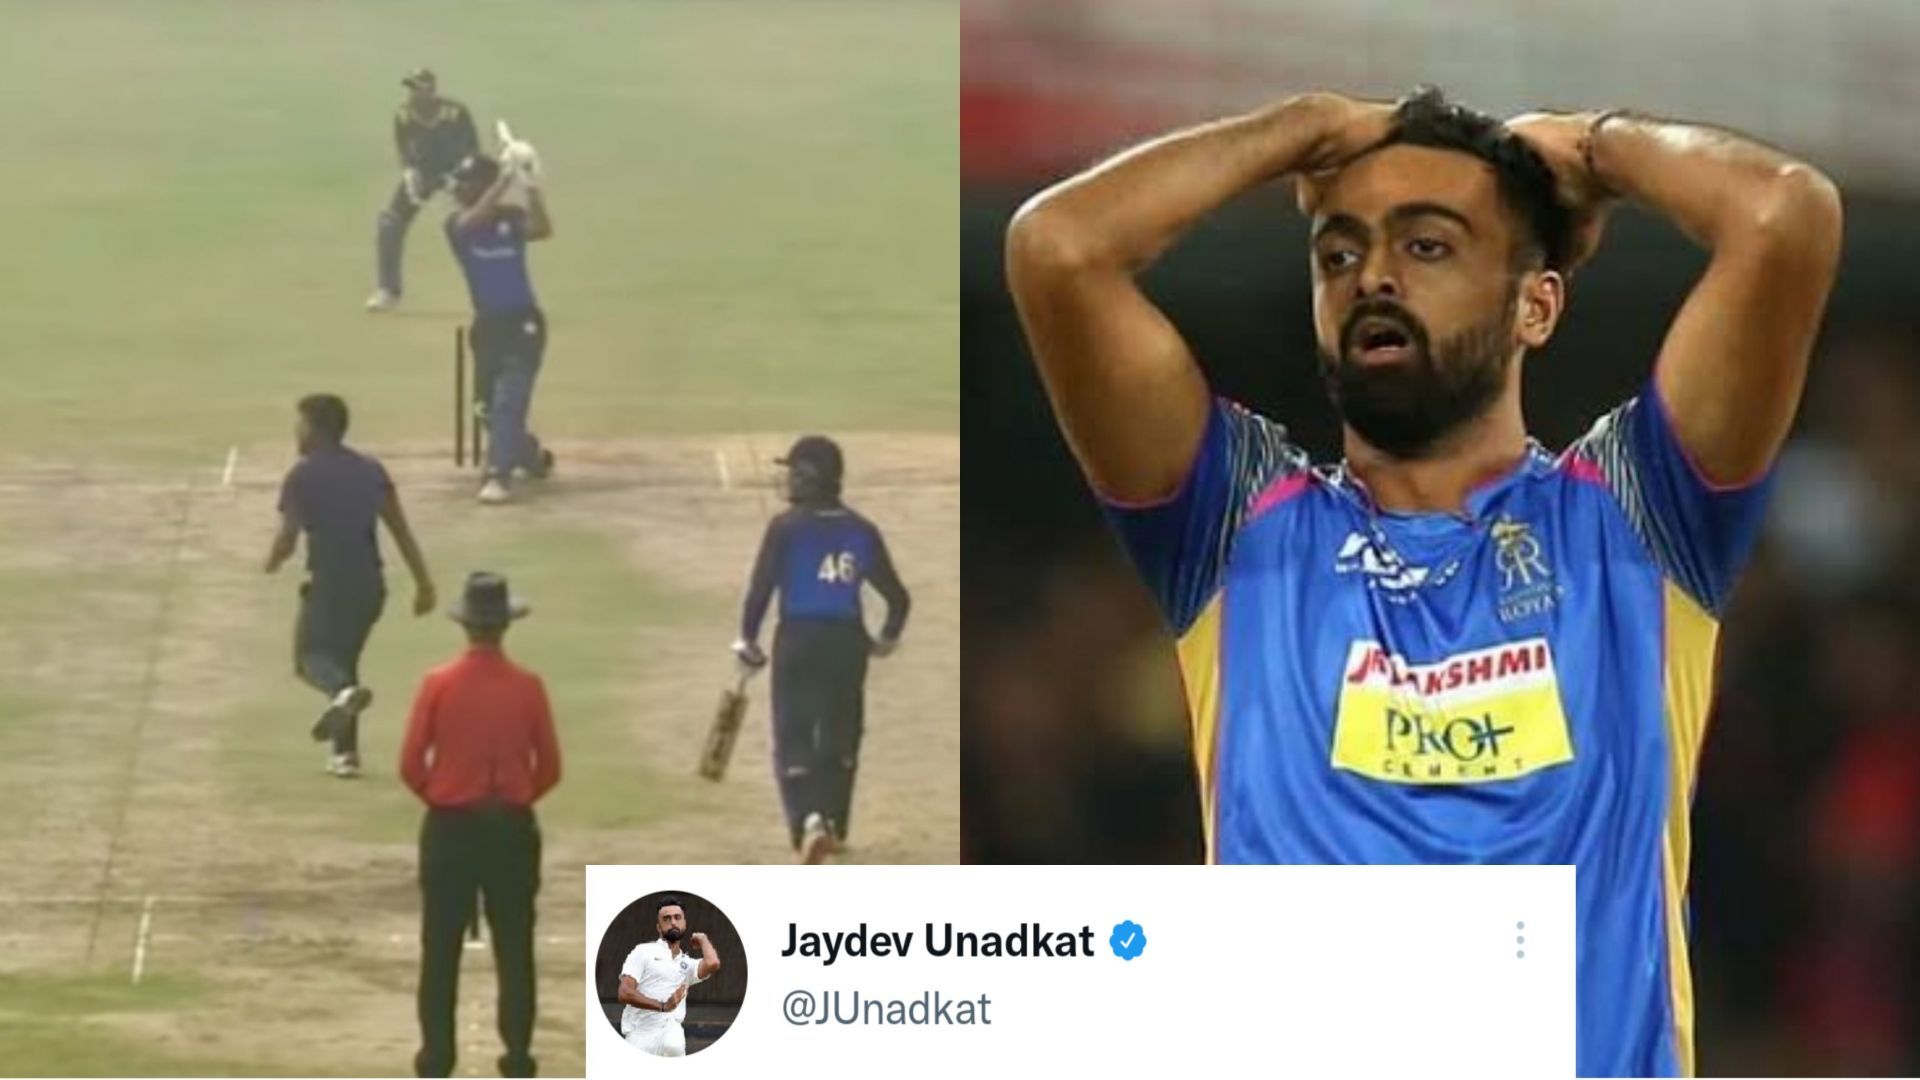 Jaydev Unadkat has not played an international match for India since 2018